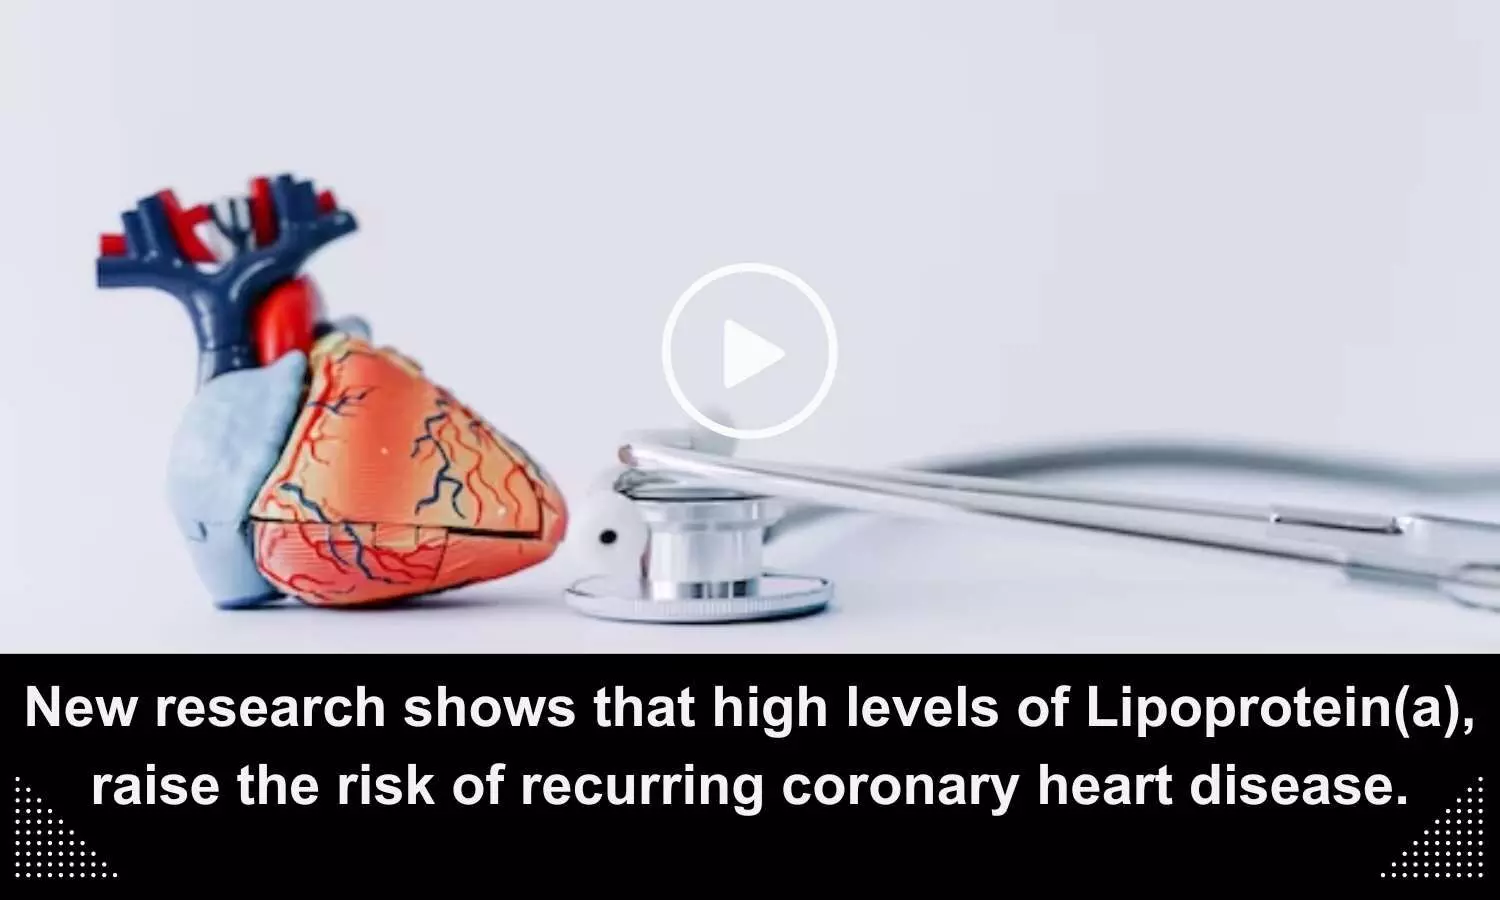 High levels of Lipoprotein(a), raise the risk of recurring coronary heart disease.